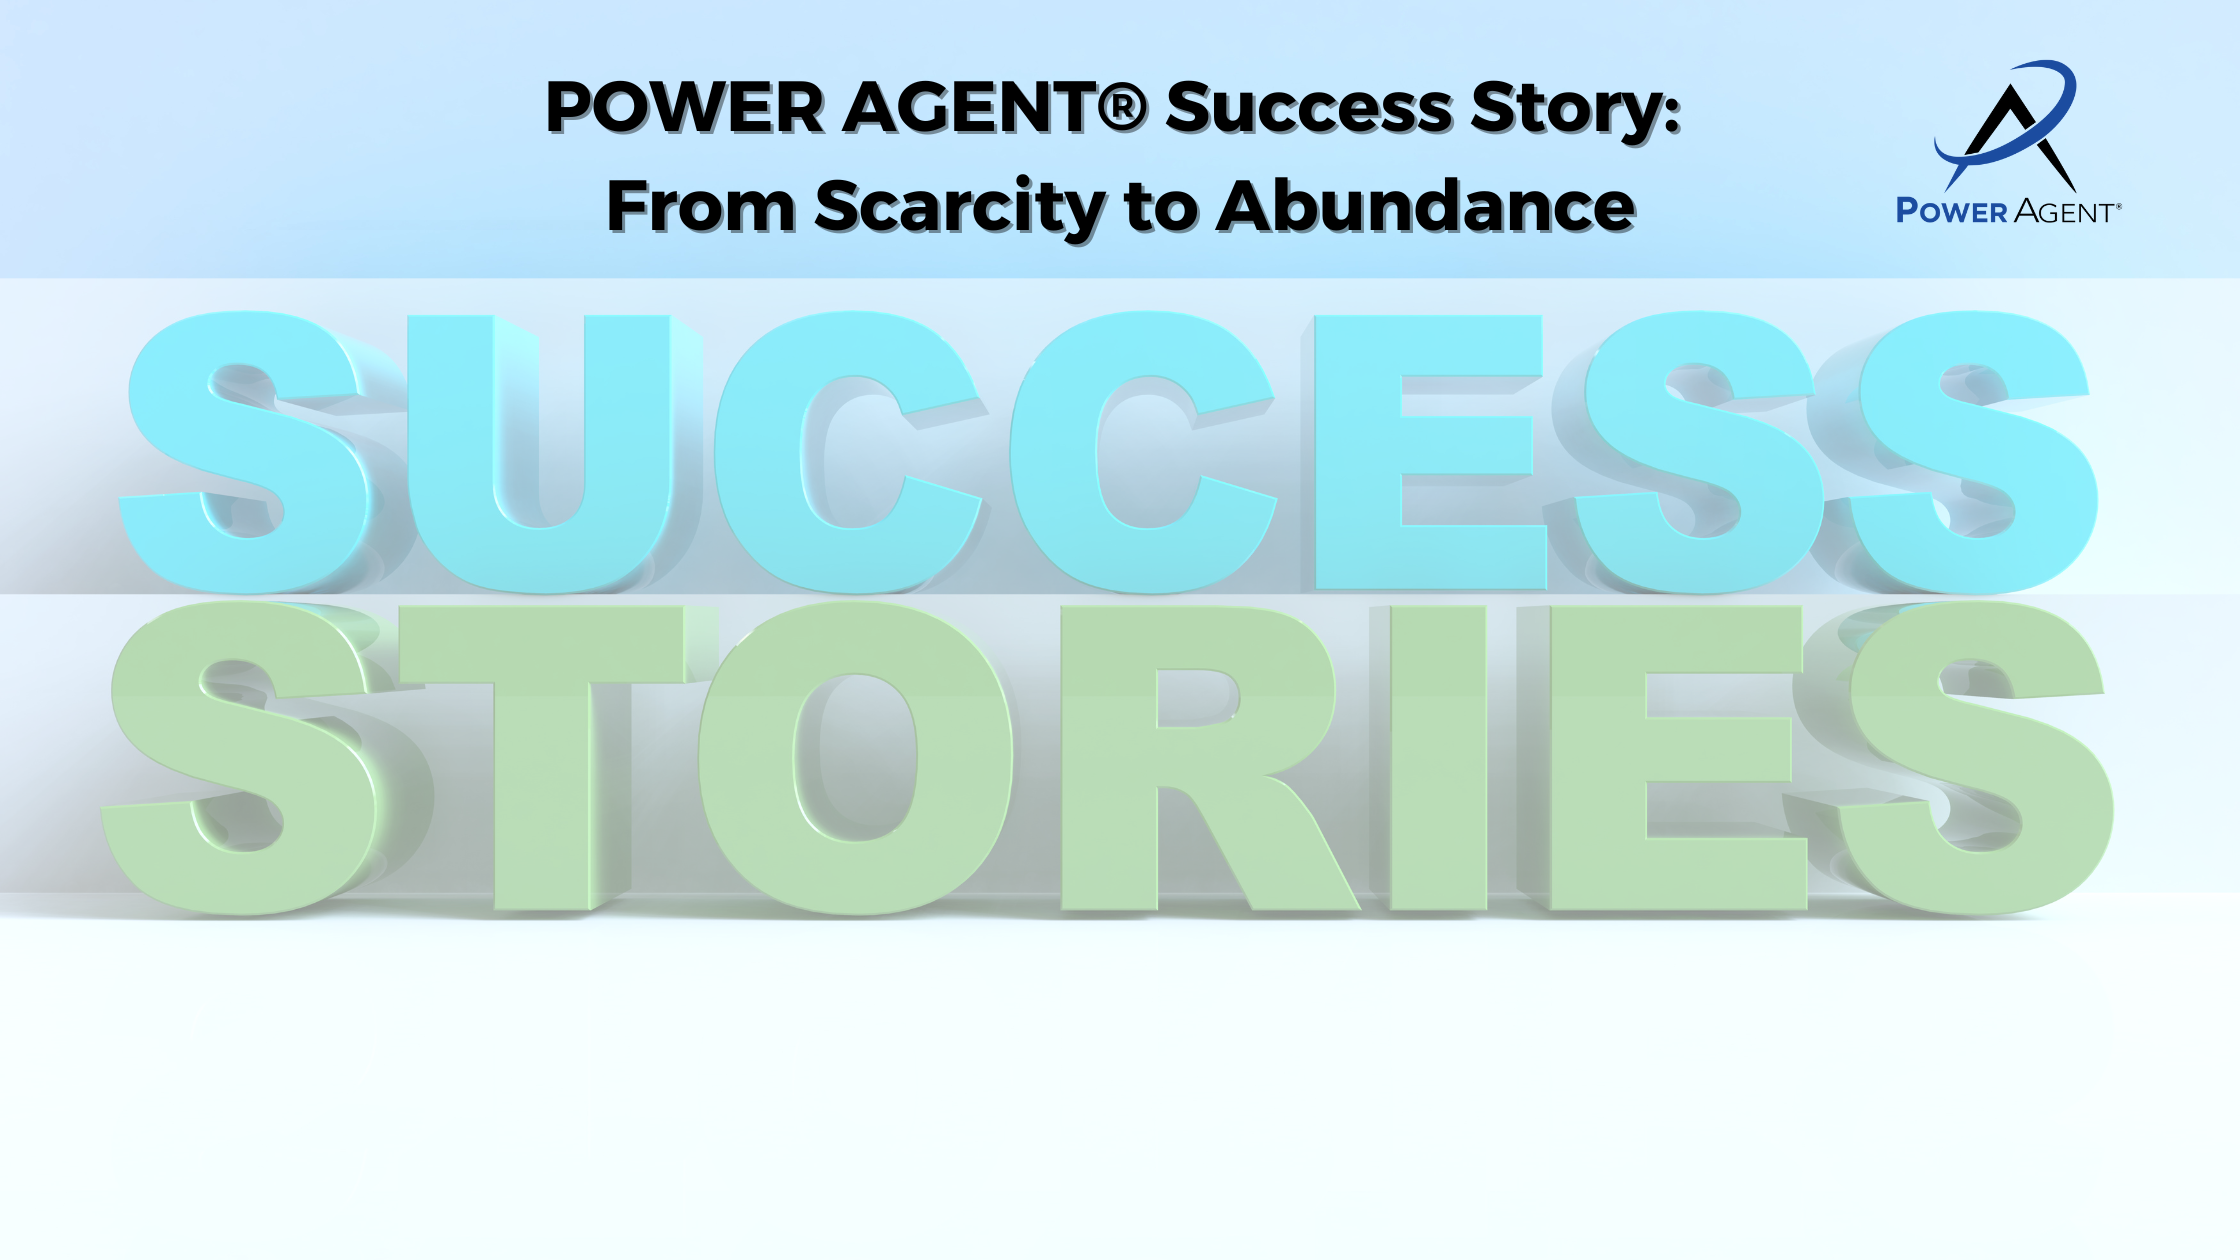 POWER AGENT® Success Story: From Scarcity to Abundance